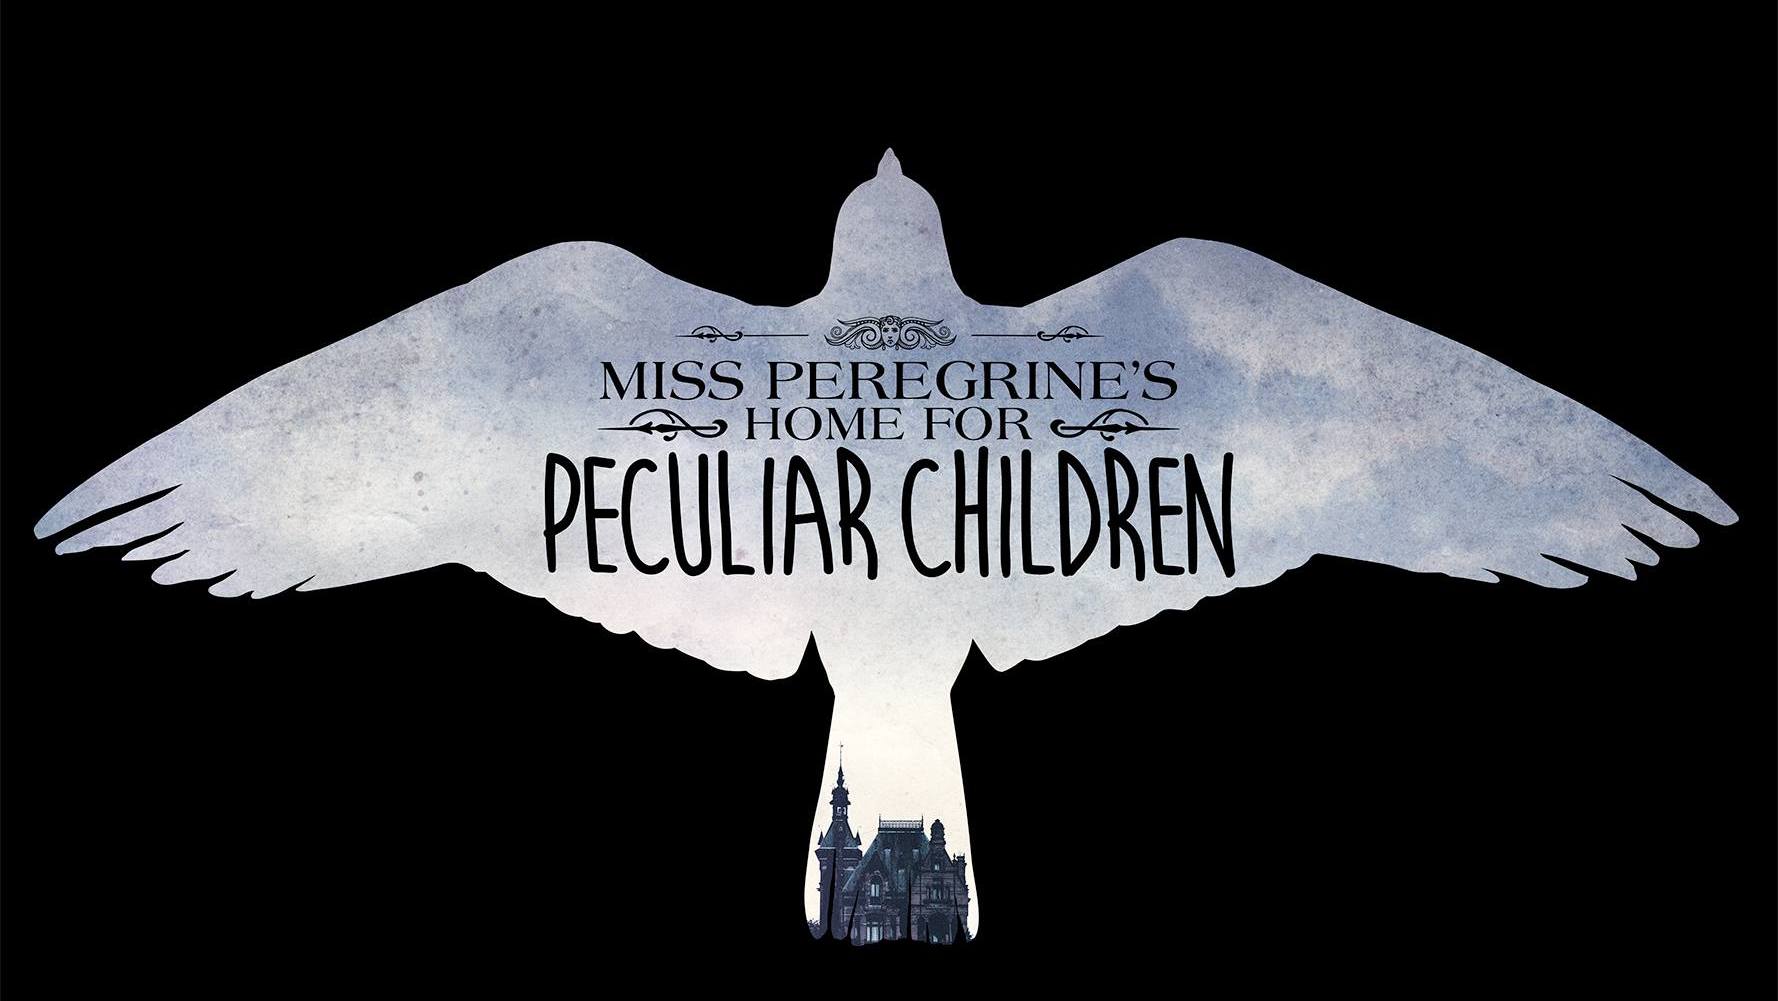 Logo Tim Burtons 'Miss Peregrine's Home for Peculiar Children' onthuld